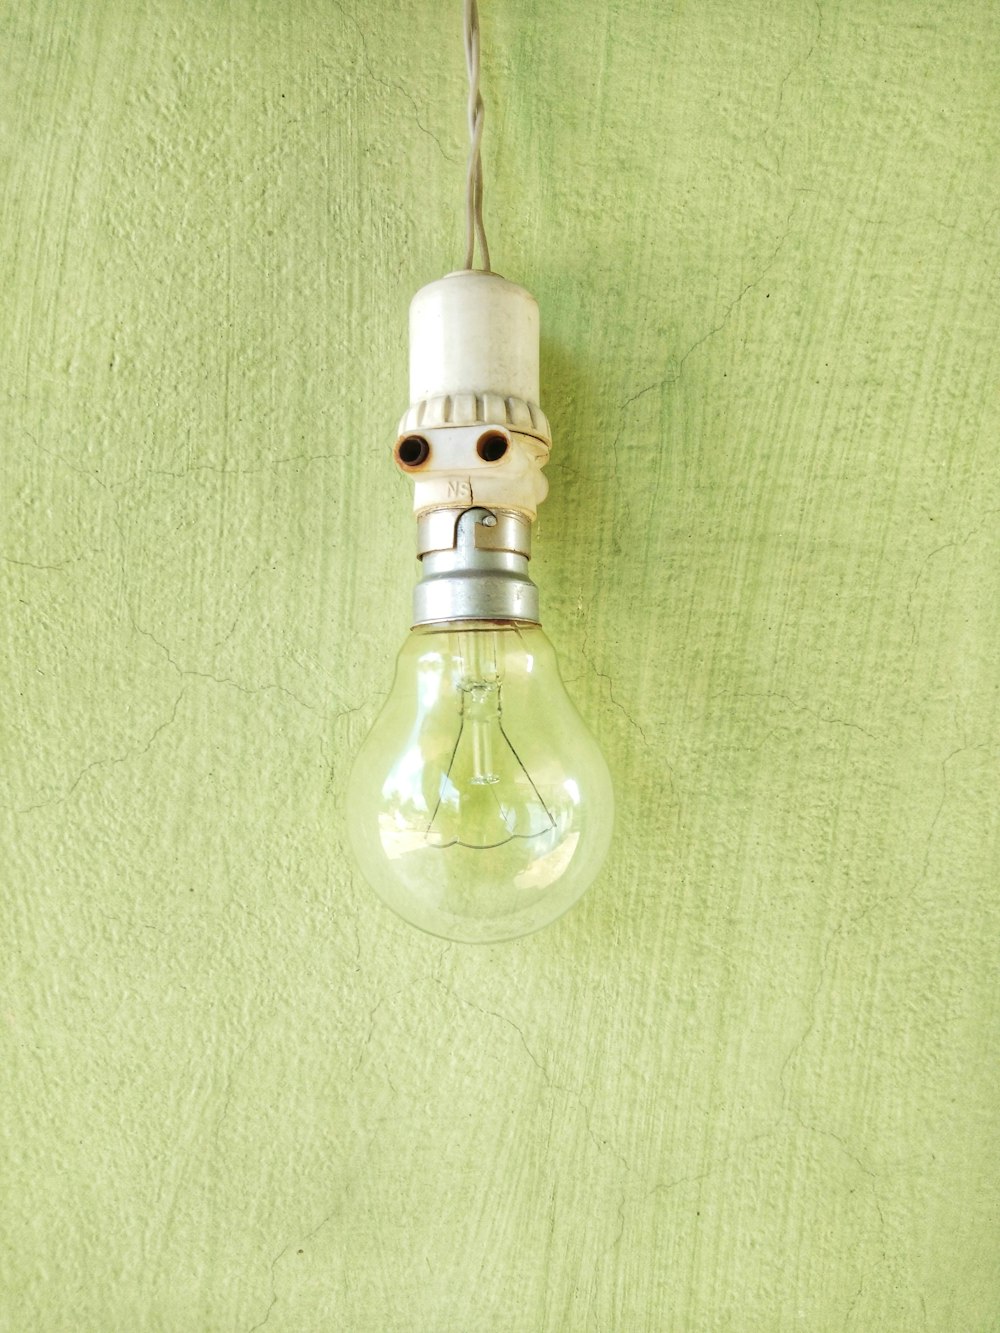 clear glass light bulb on green textile